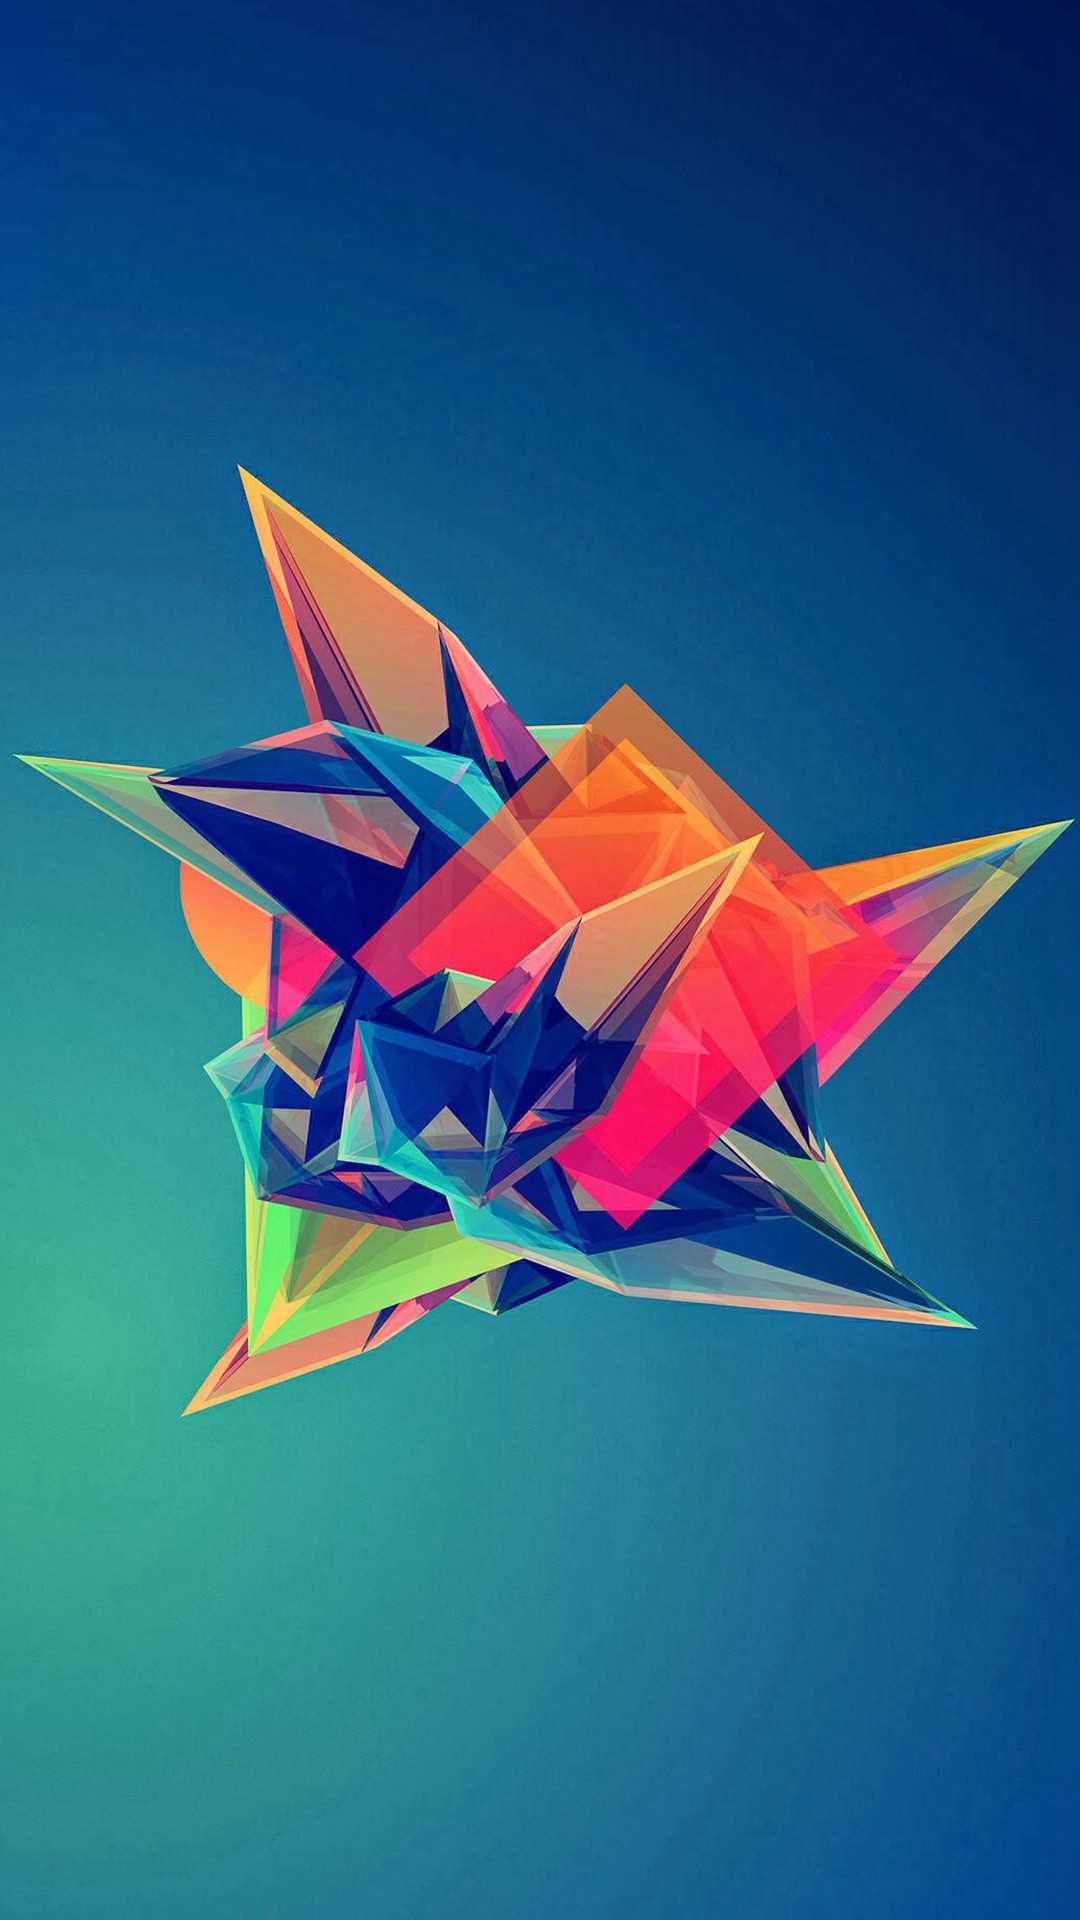 1080x1920 Colorful Cool Abstract Polygonal Shape iPhone 6 plus wallpaper.